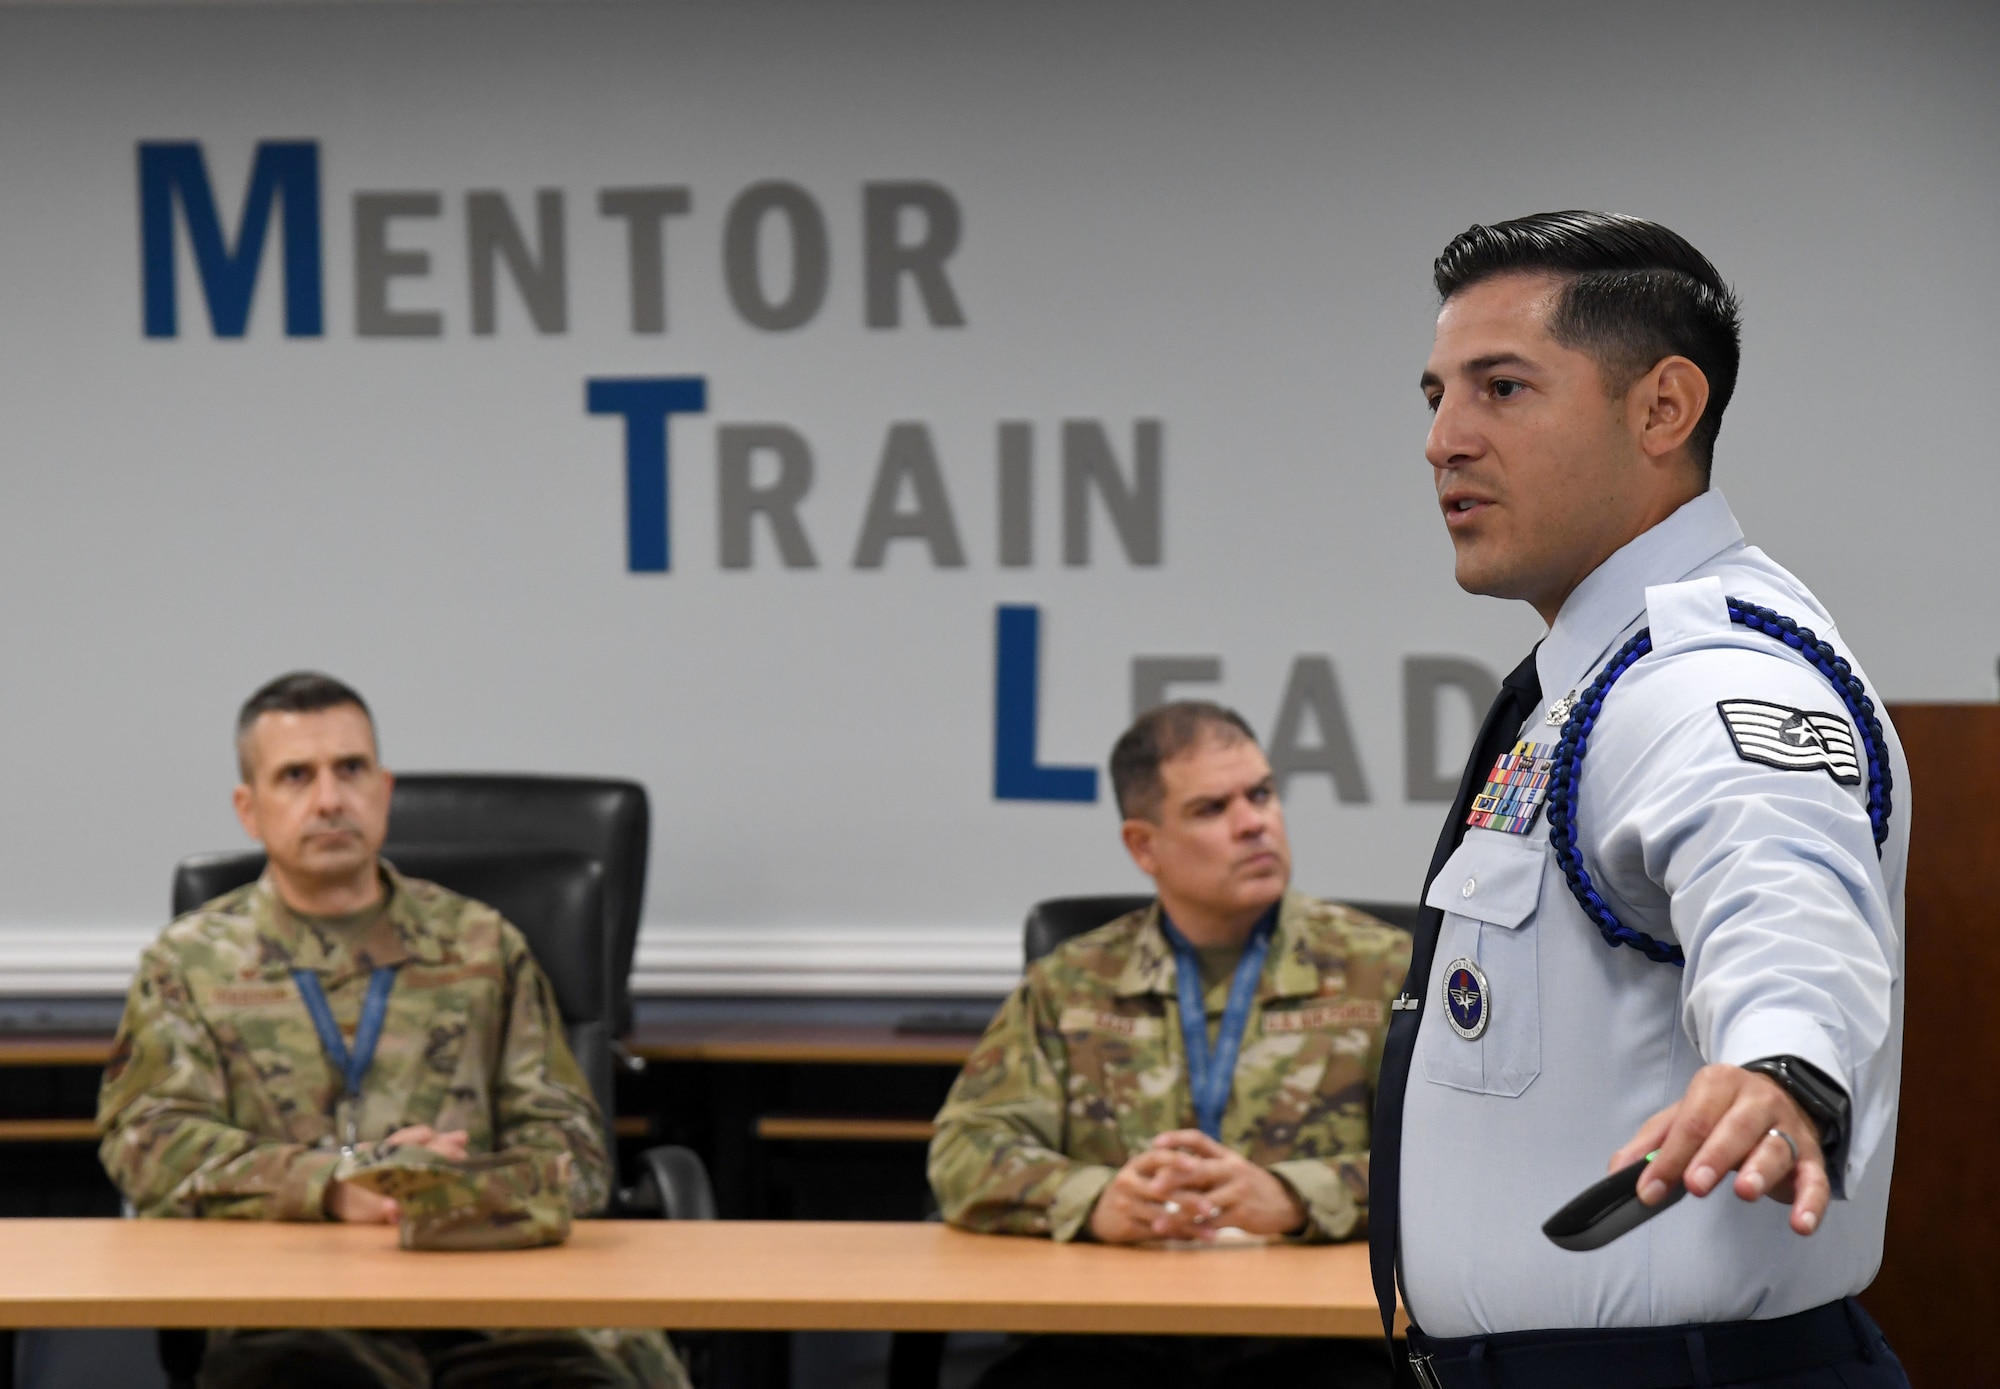 U.S. Air Force Tech. Sgt. Nicholas Holguin, 81st Training Support Squadron military training leader, briefs on the military training leader school training techniques during the Second Air Force Technical Training-101 Seminar inside Lott Hall at Keesler Air Force Base, Mississippi, Oct. 27, 2022.